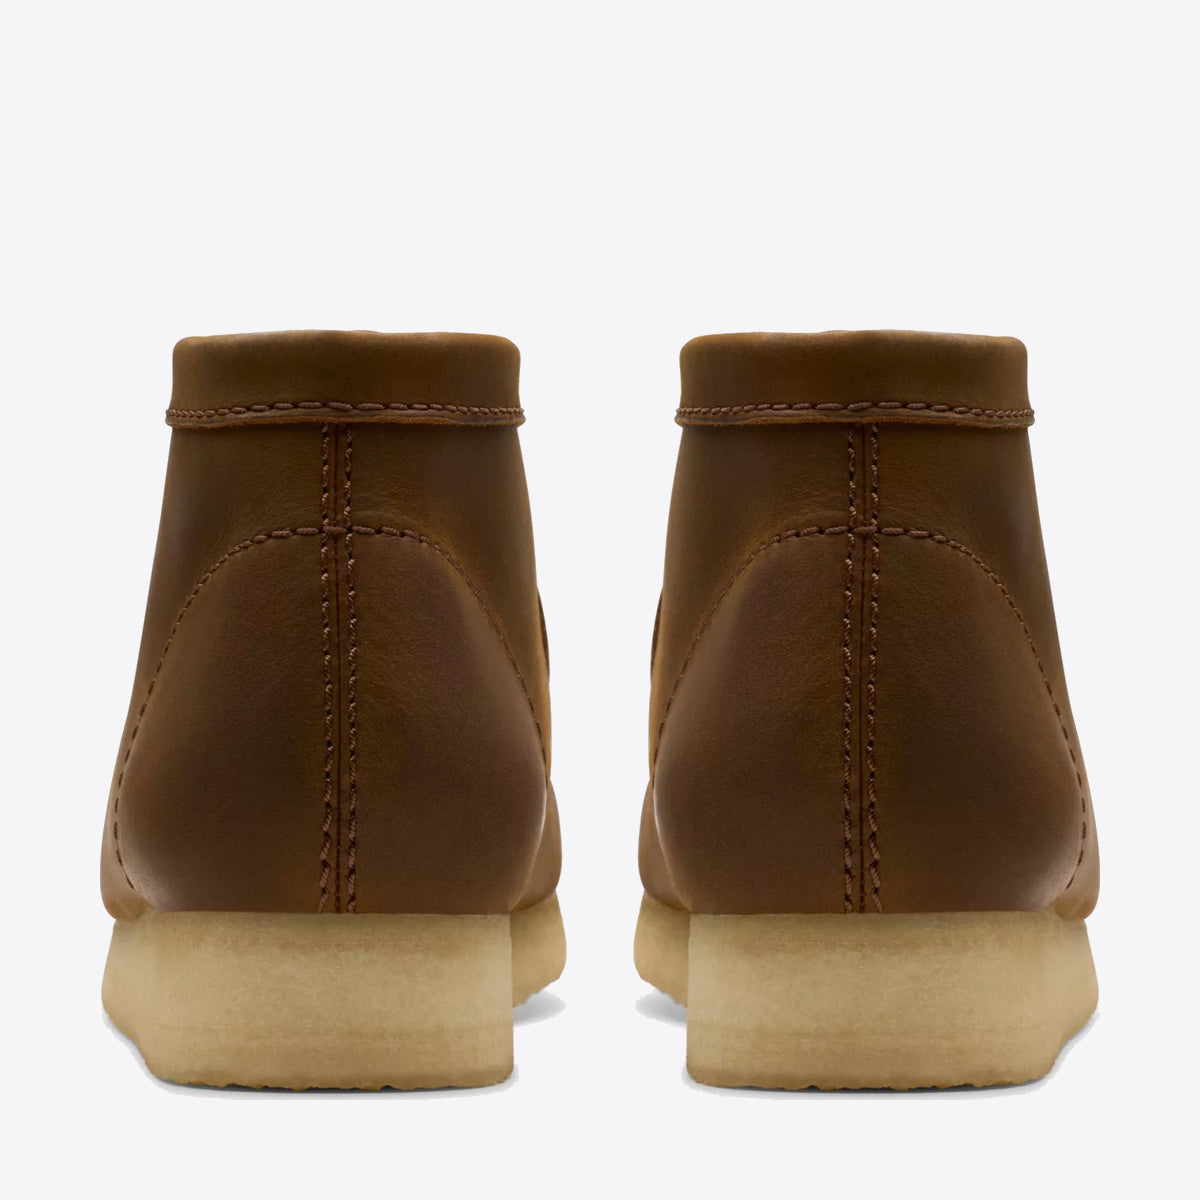 CLARKS Wallabee Boot Leather Beeswax - Image 5